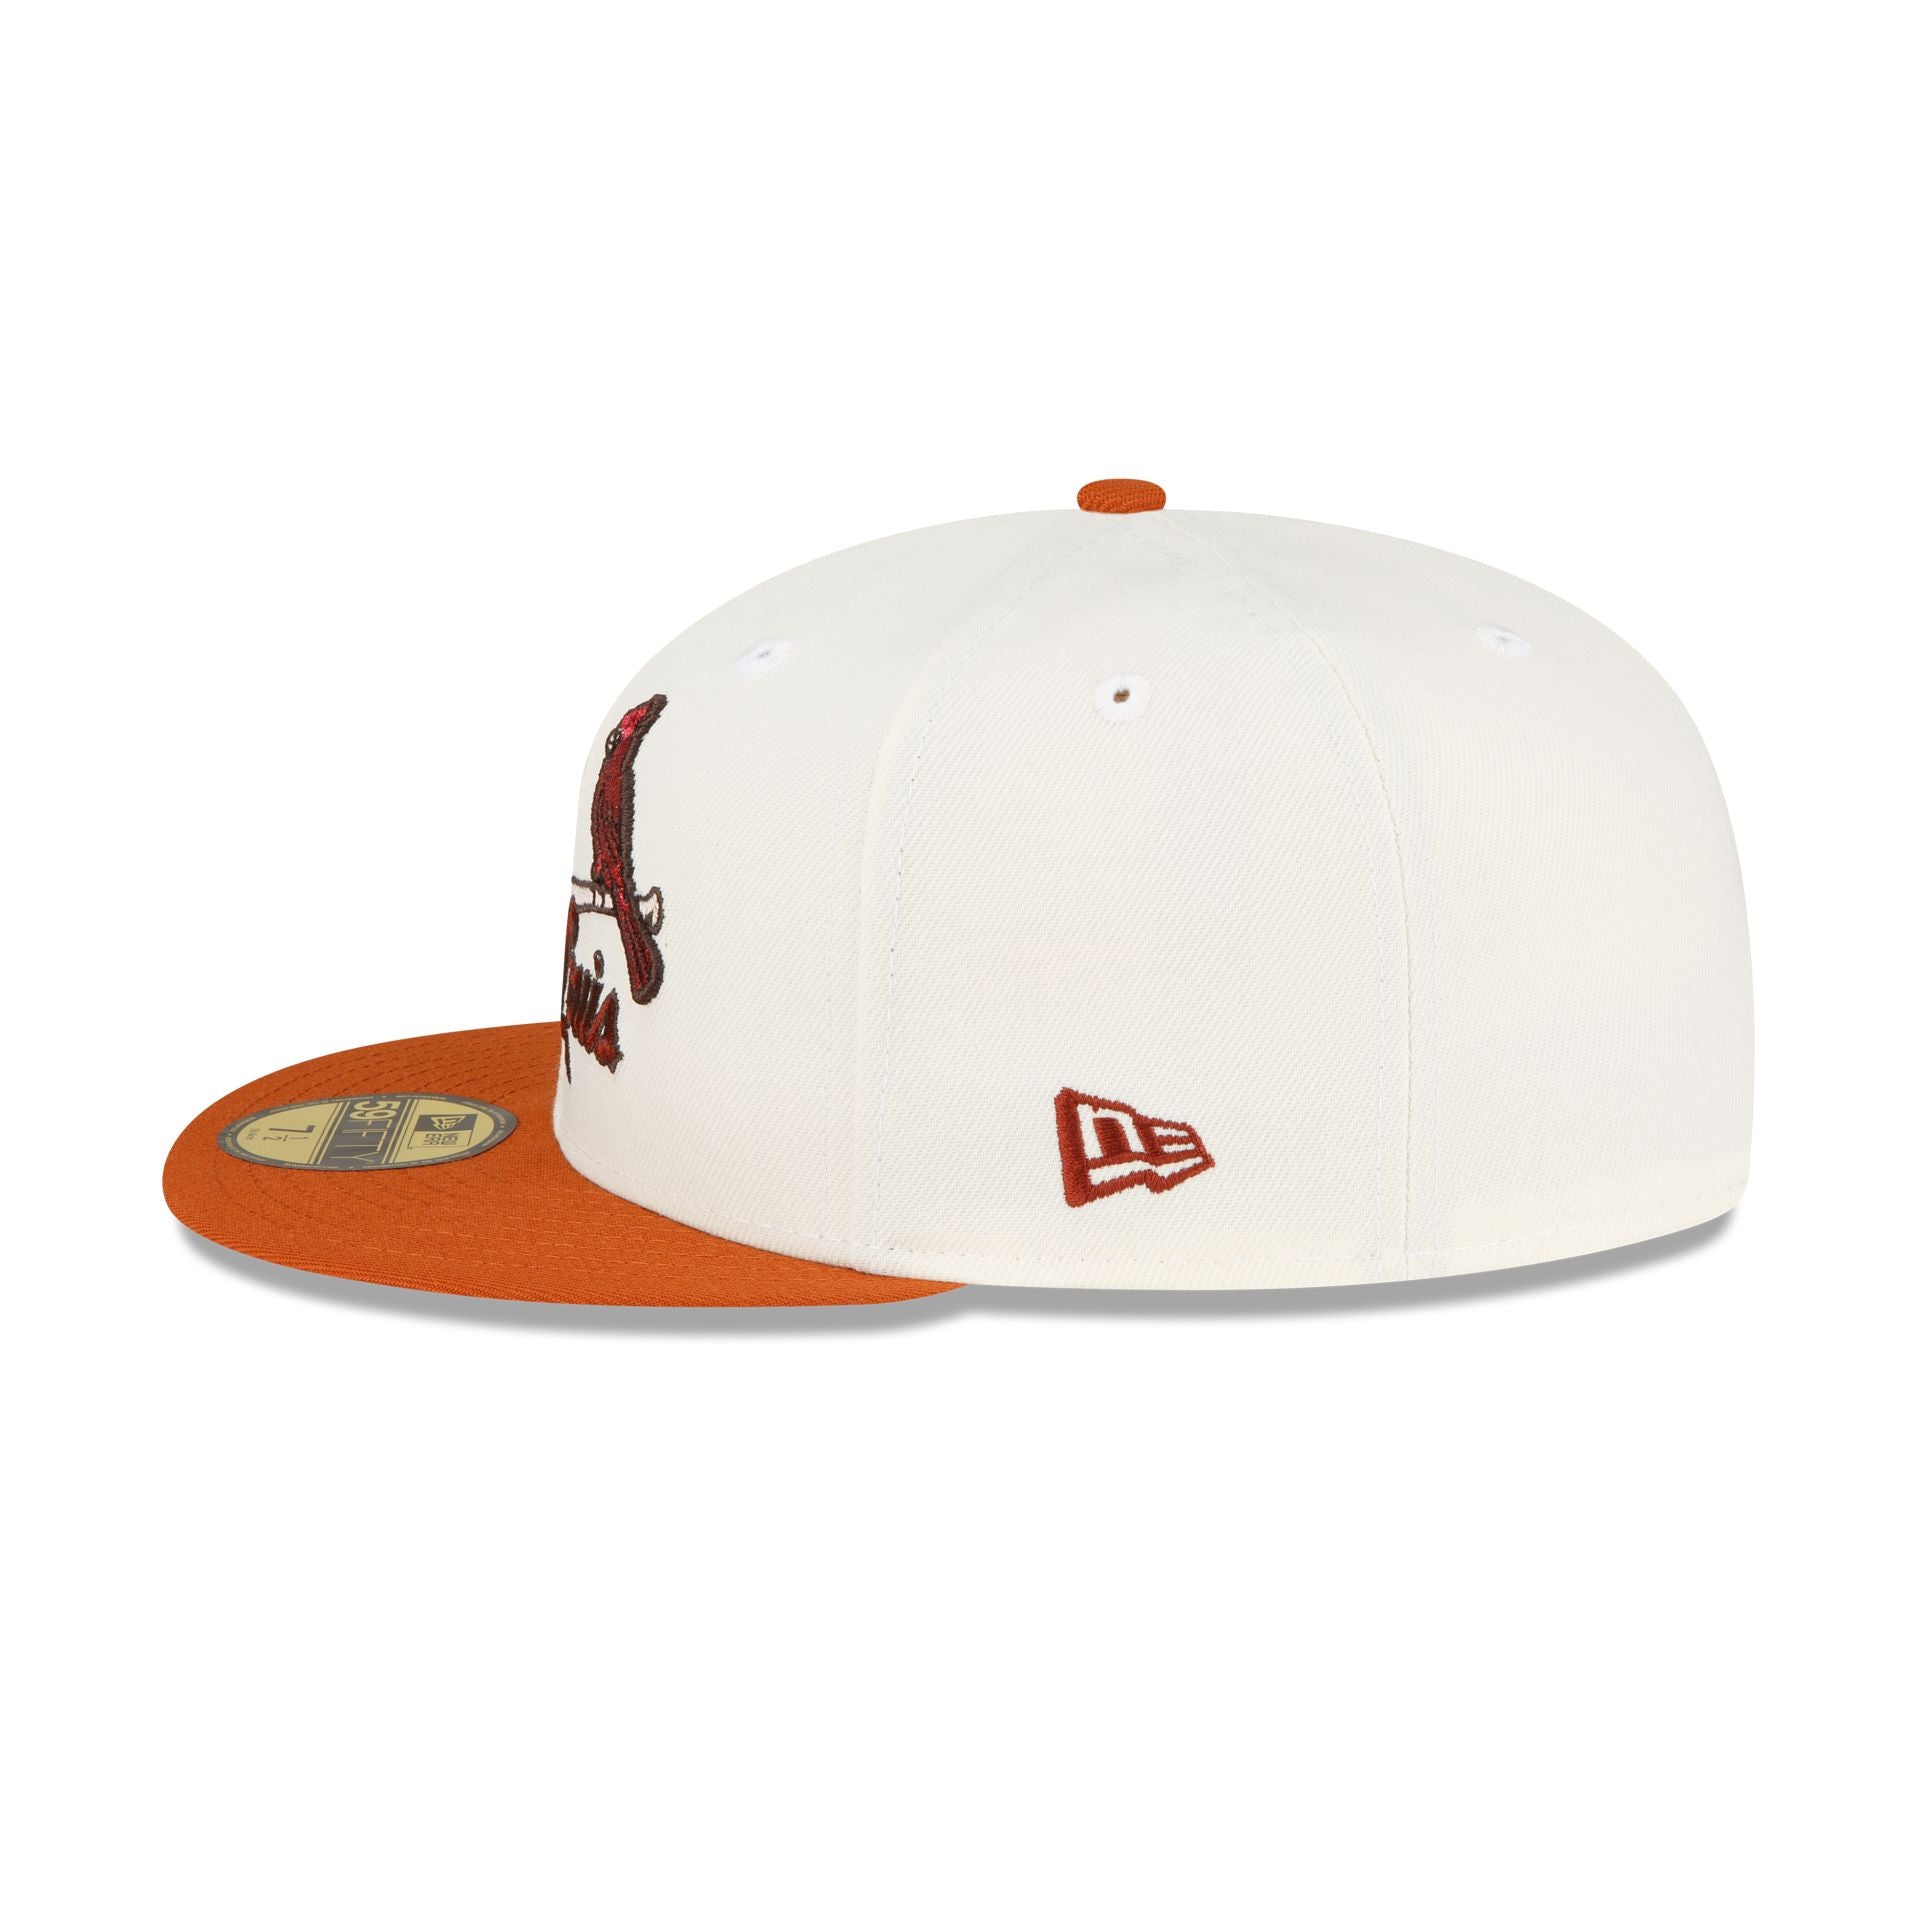 St. Louis Cardinals New Era 59FIFTY Fitted Hat - Orange/Black